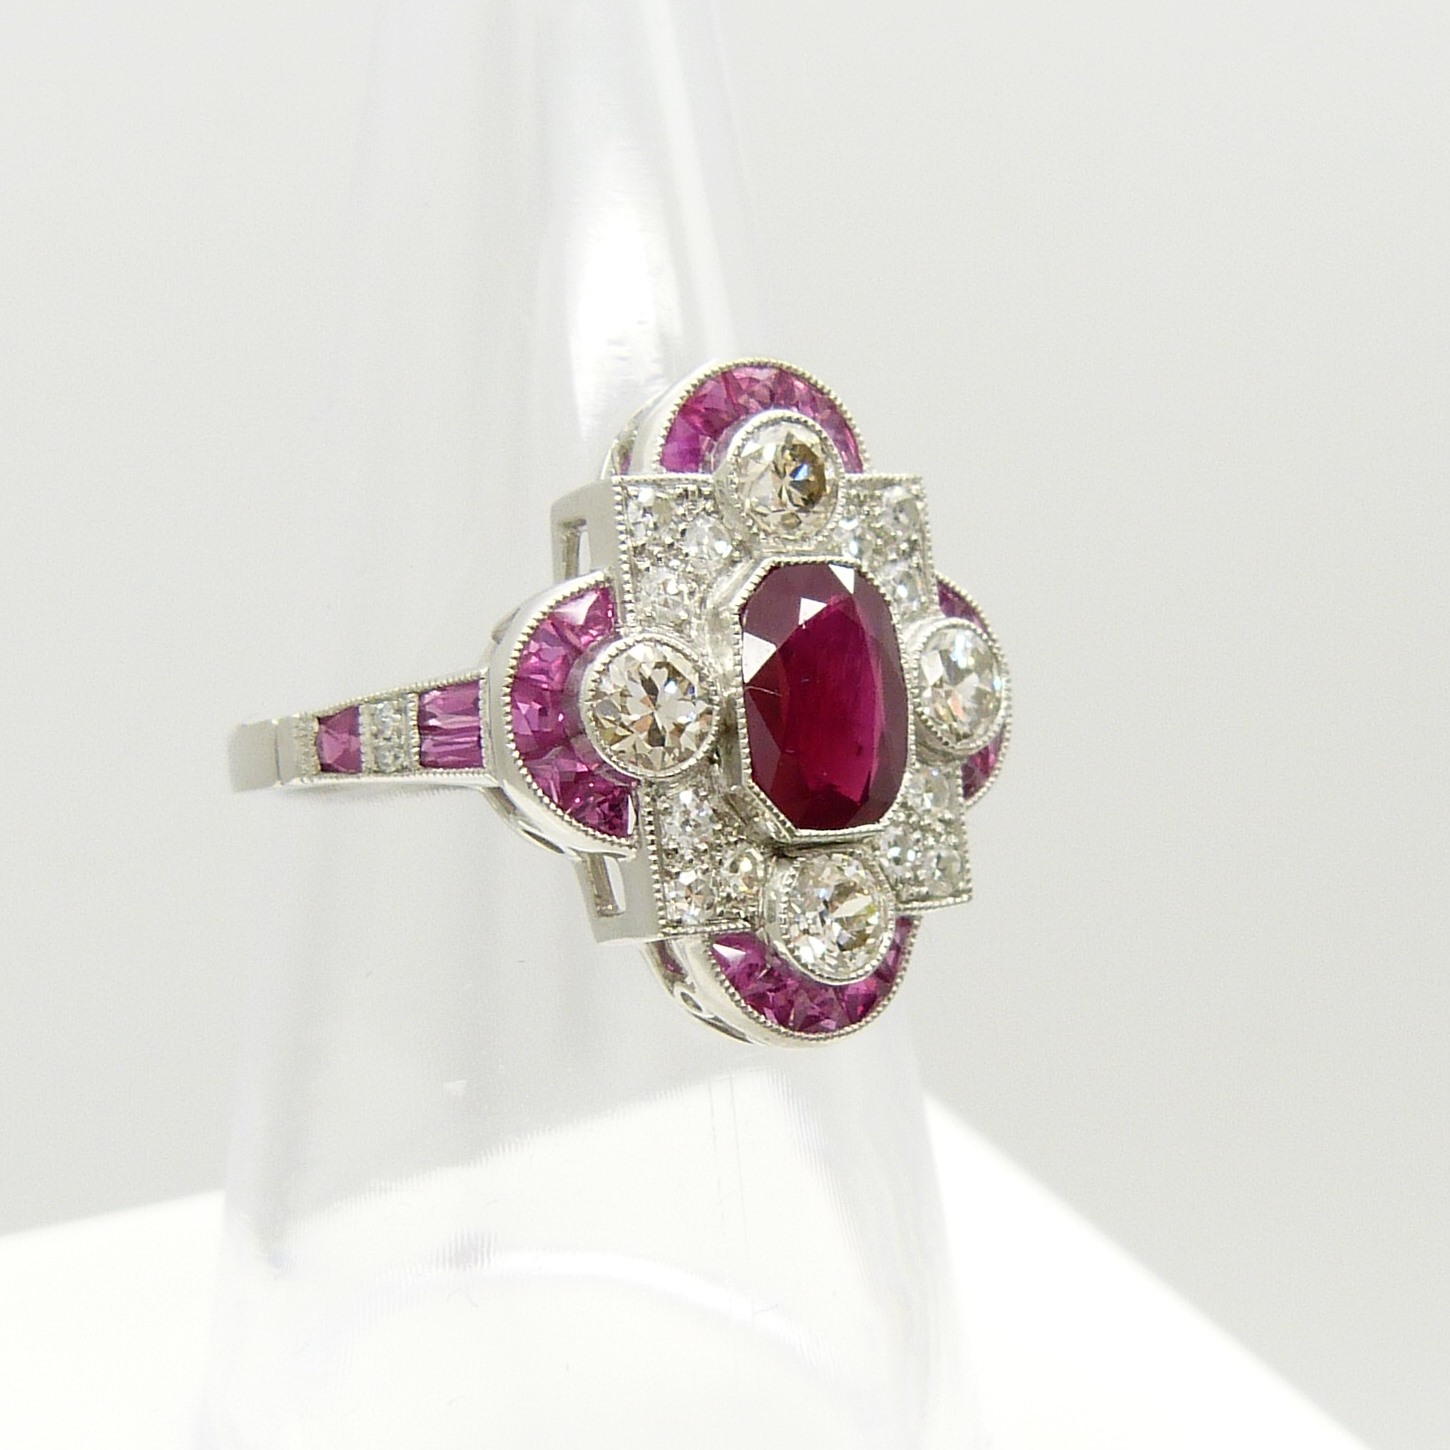 An Edwardian / Deco-style platinum ring set with rubies and diamonds - Image 7 of 7